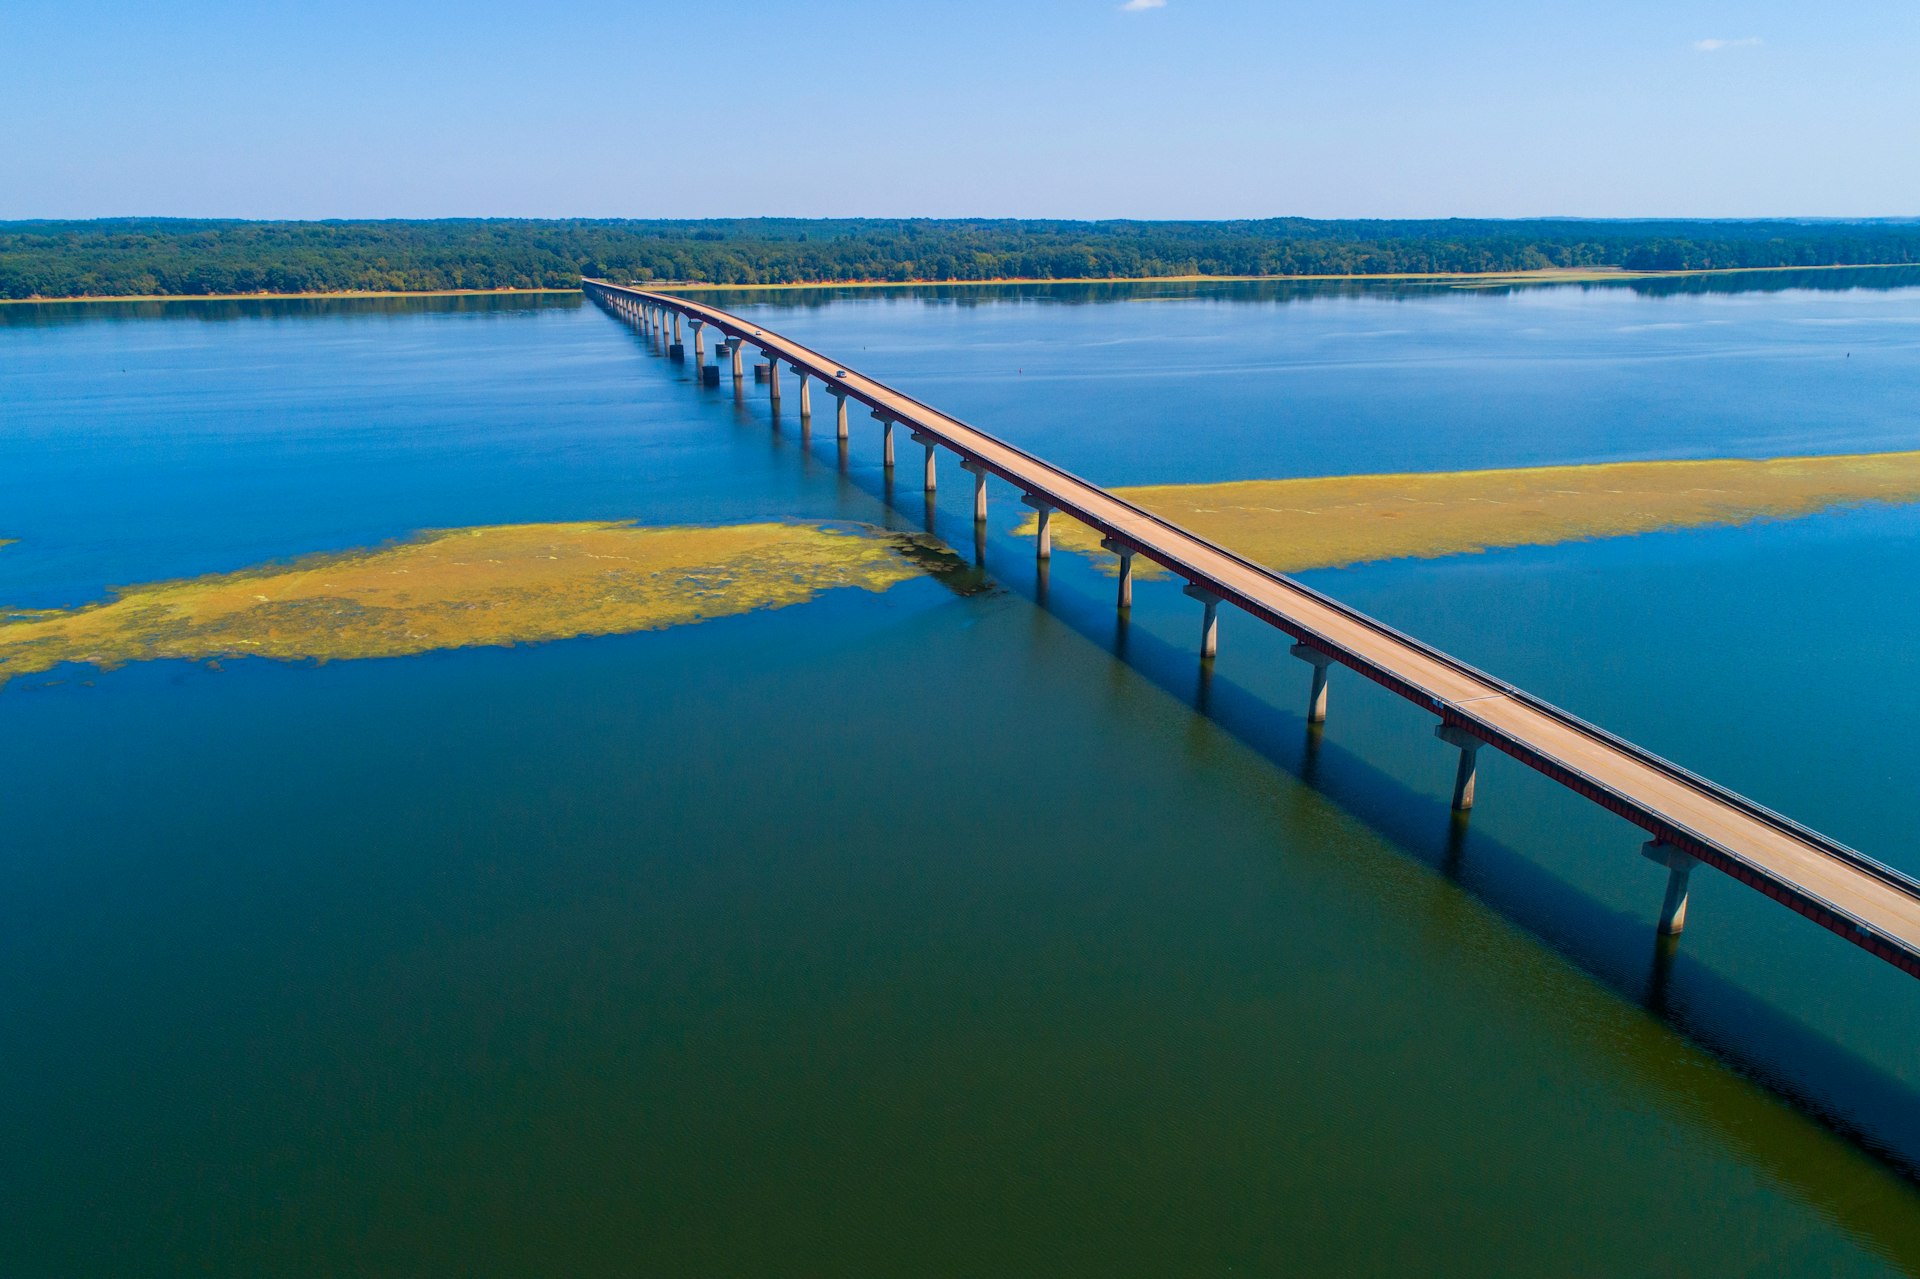 An aerial view of John Coffee Memorial Bridge, across the Tennessee River on the Natchez Trace Parkway, Alabama, USA